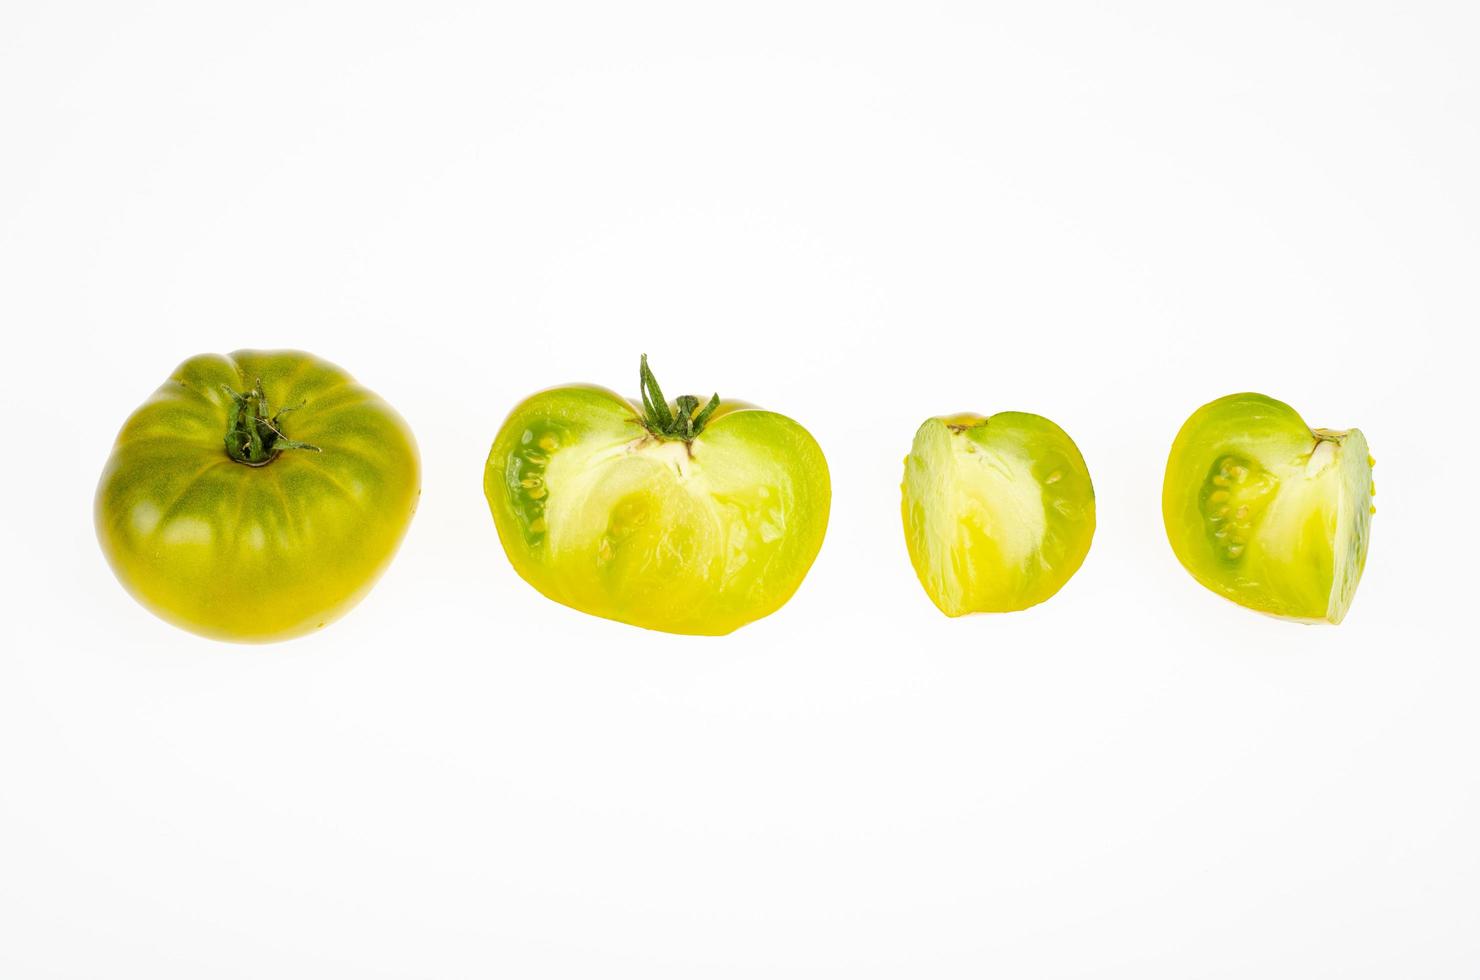 Whole fruit and slices yellow-green color of ripe tomato fruits, isolated on white background. Studio Photo. photo